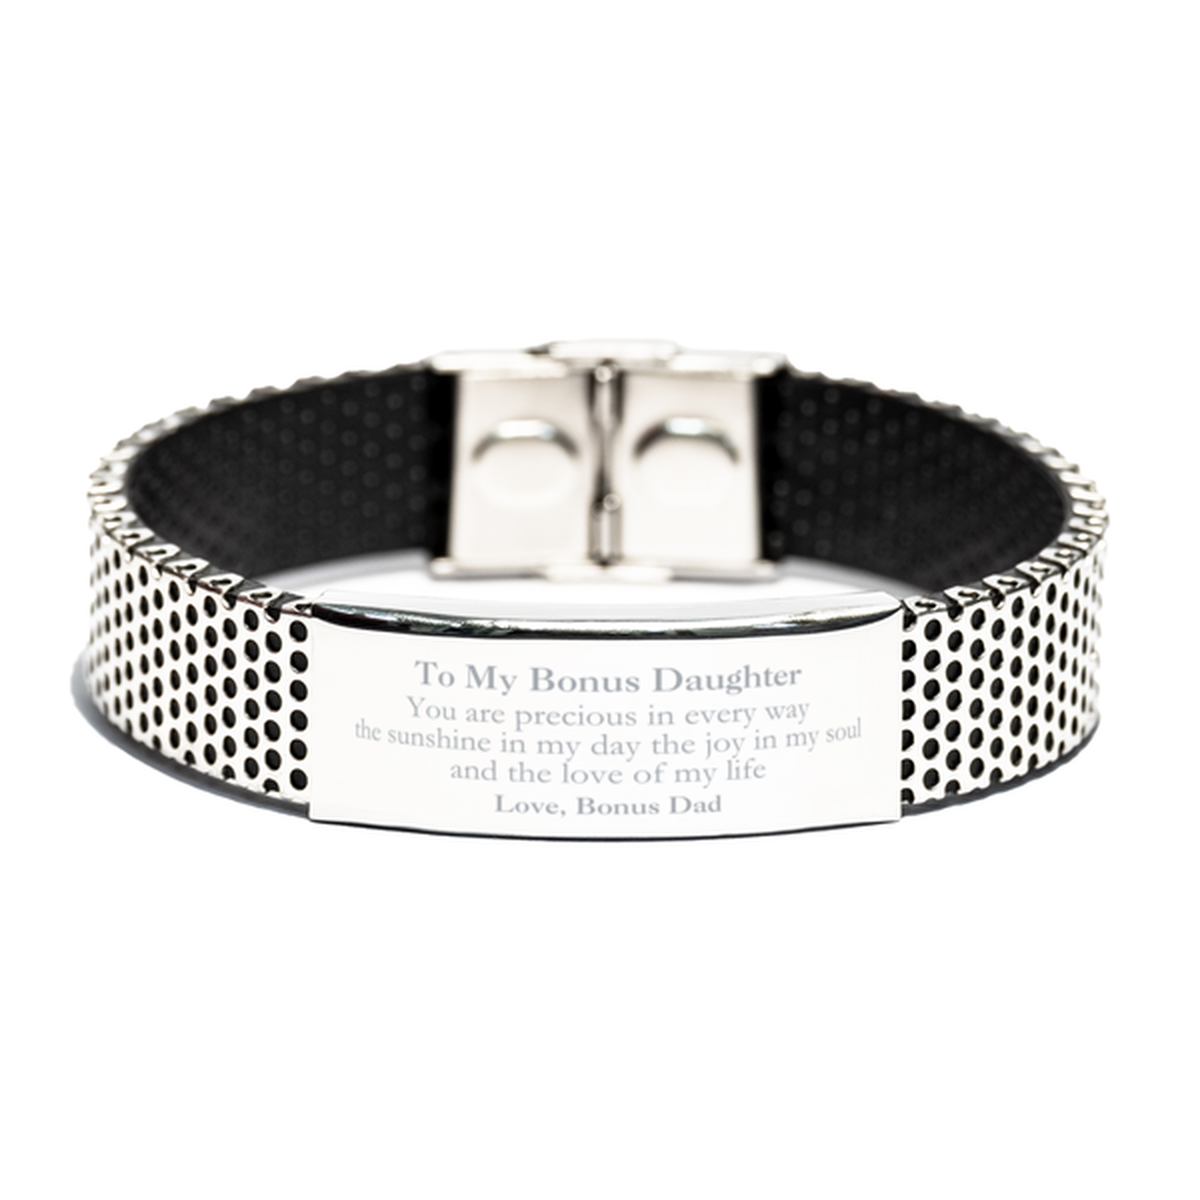 Graduation Gifts for Bonus Daughter Stainless Steel Bracelet Present from Bonus Dad, Christmas Bonus Daughter Birthday Gifts Bonus Daughter You are precious in every way the sunshine in my day. Love, Bonus Dad